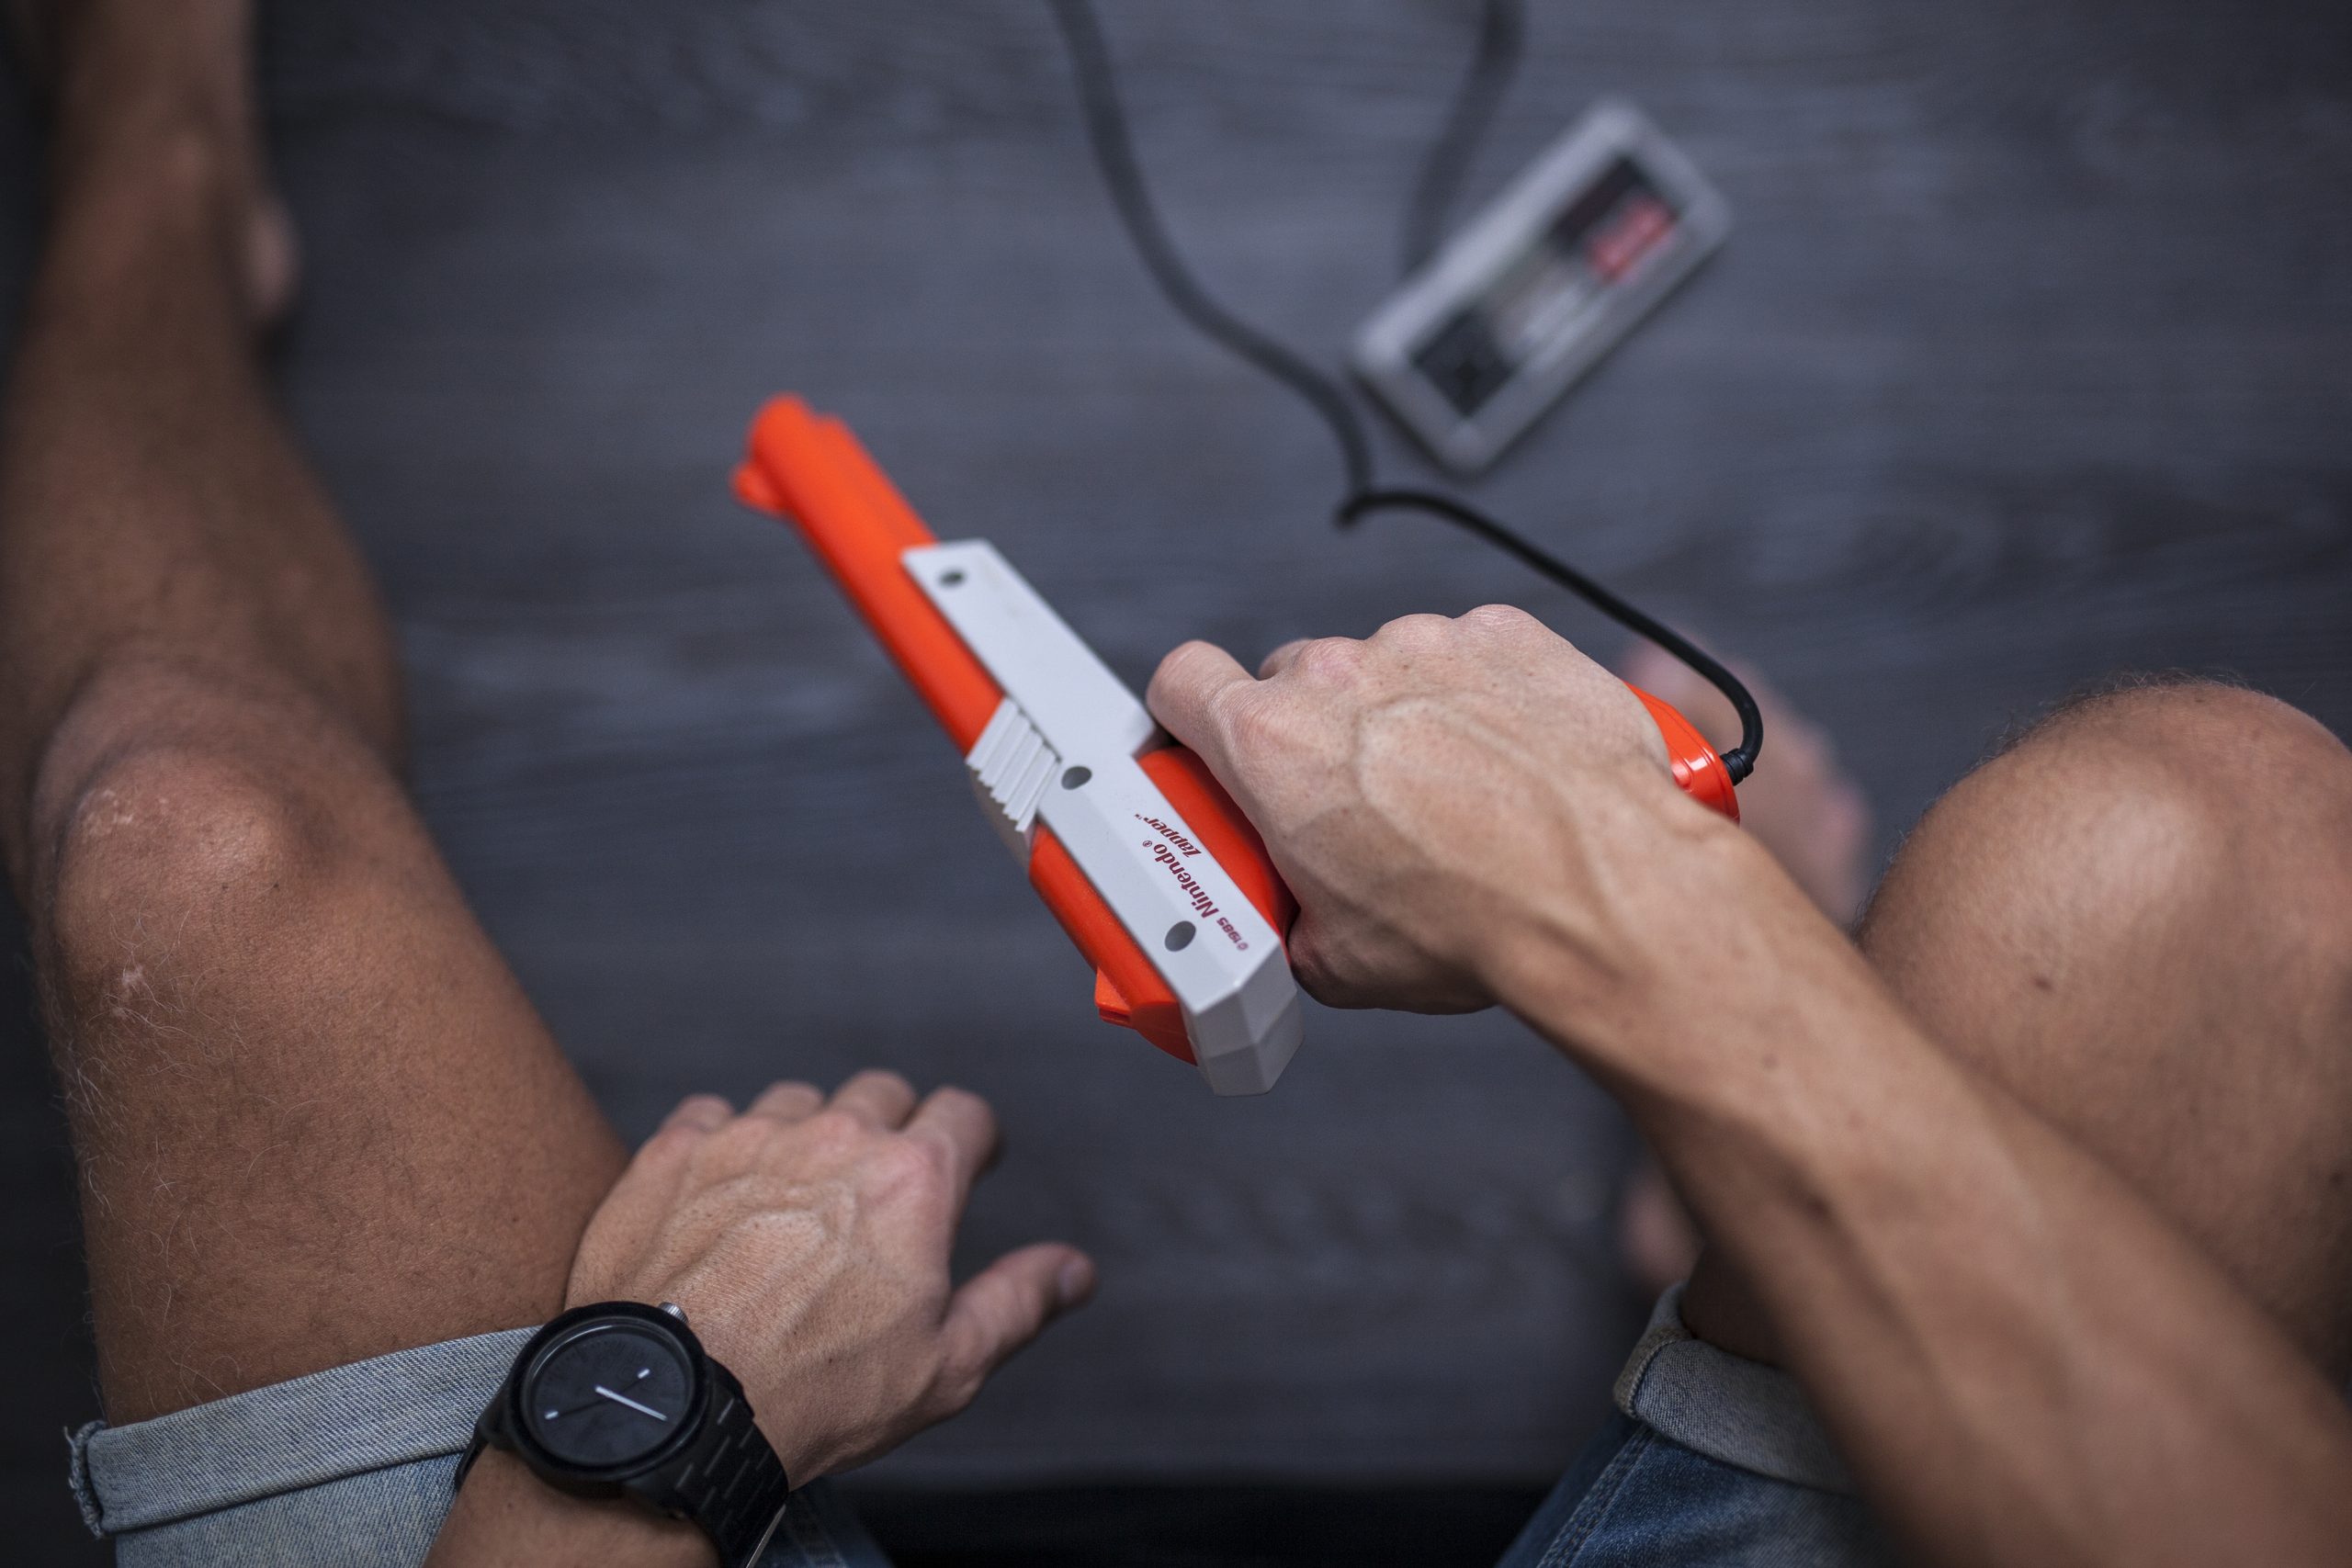 Gothenburg, Sweden - January 31, 2015: A shot from above of a young man's hands using a 1985 Nintendo Zapper, a remote game controller for the Nintendo Entertainment System developed by Nintendo Co., Ltd. in the 1980s. His hands are posing casually as he is resting between games. Natural lighting. Shot on a grey wooden background. | DeviceDaily.com